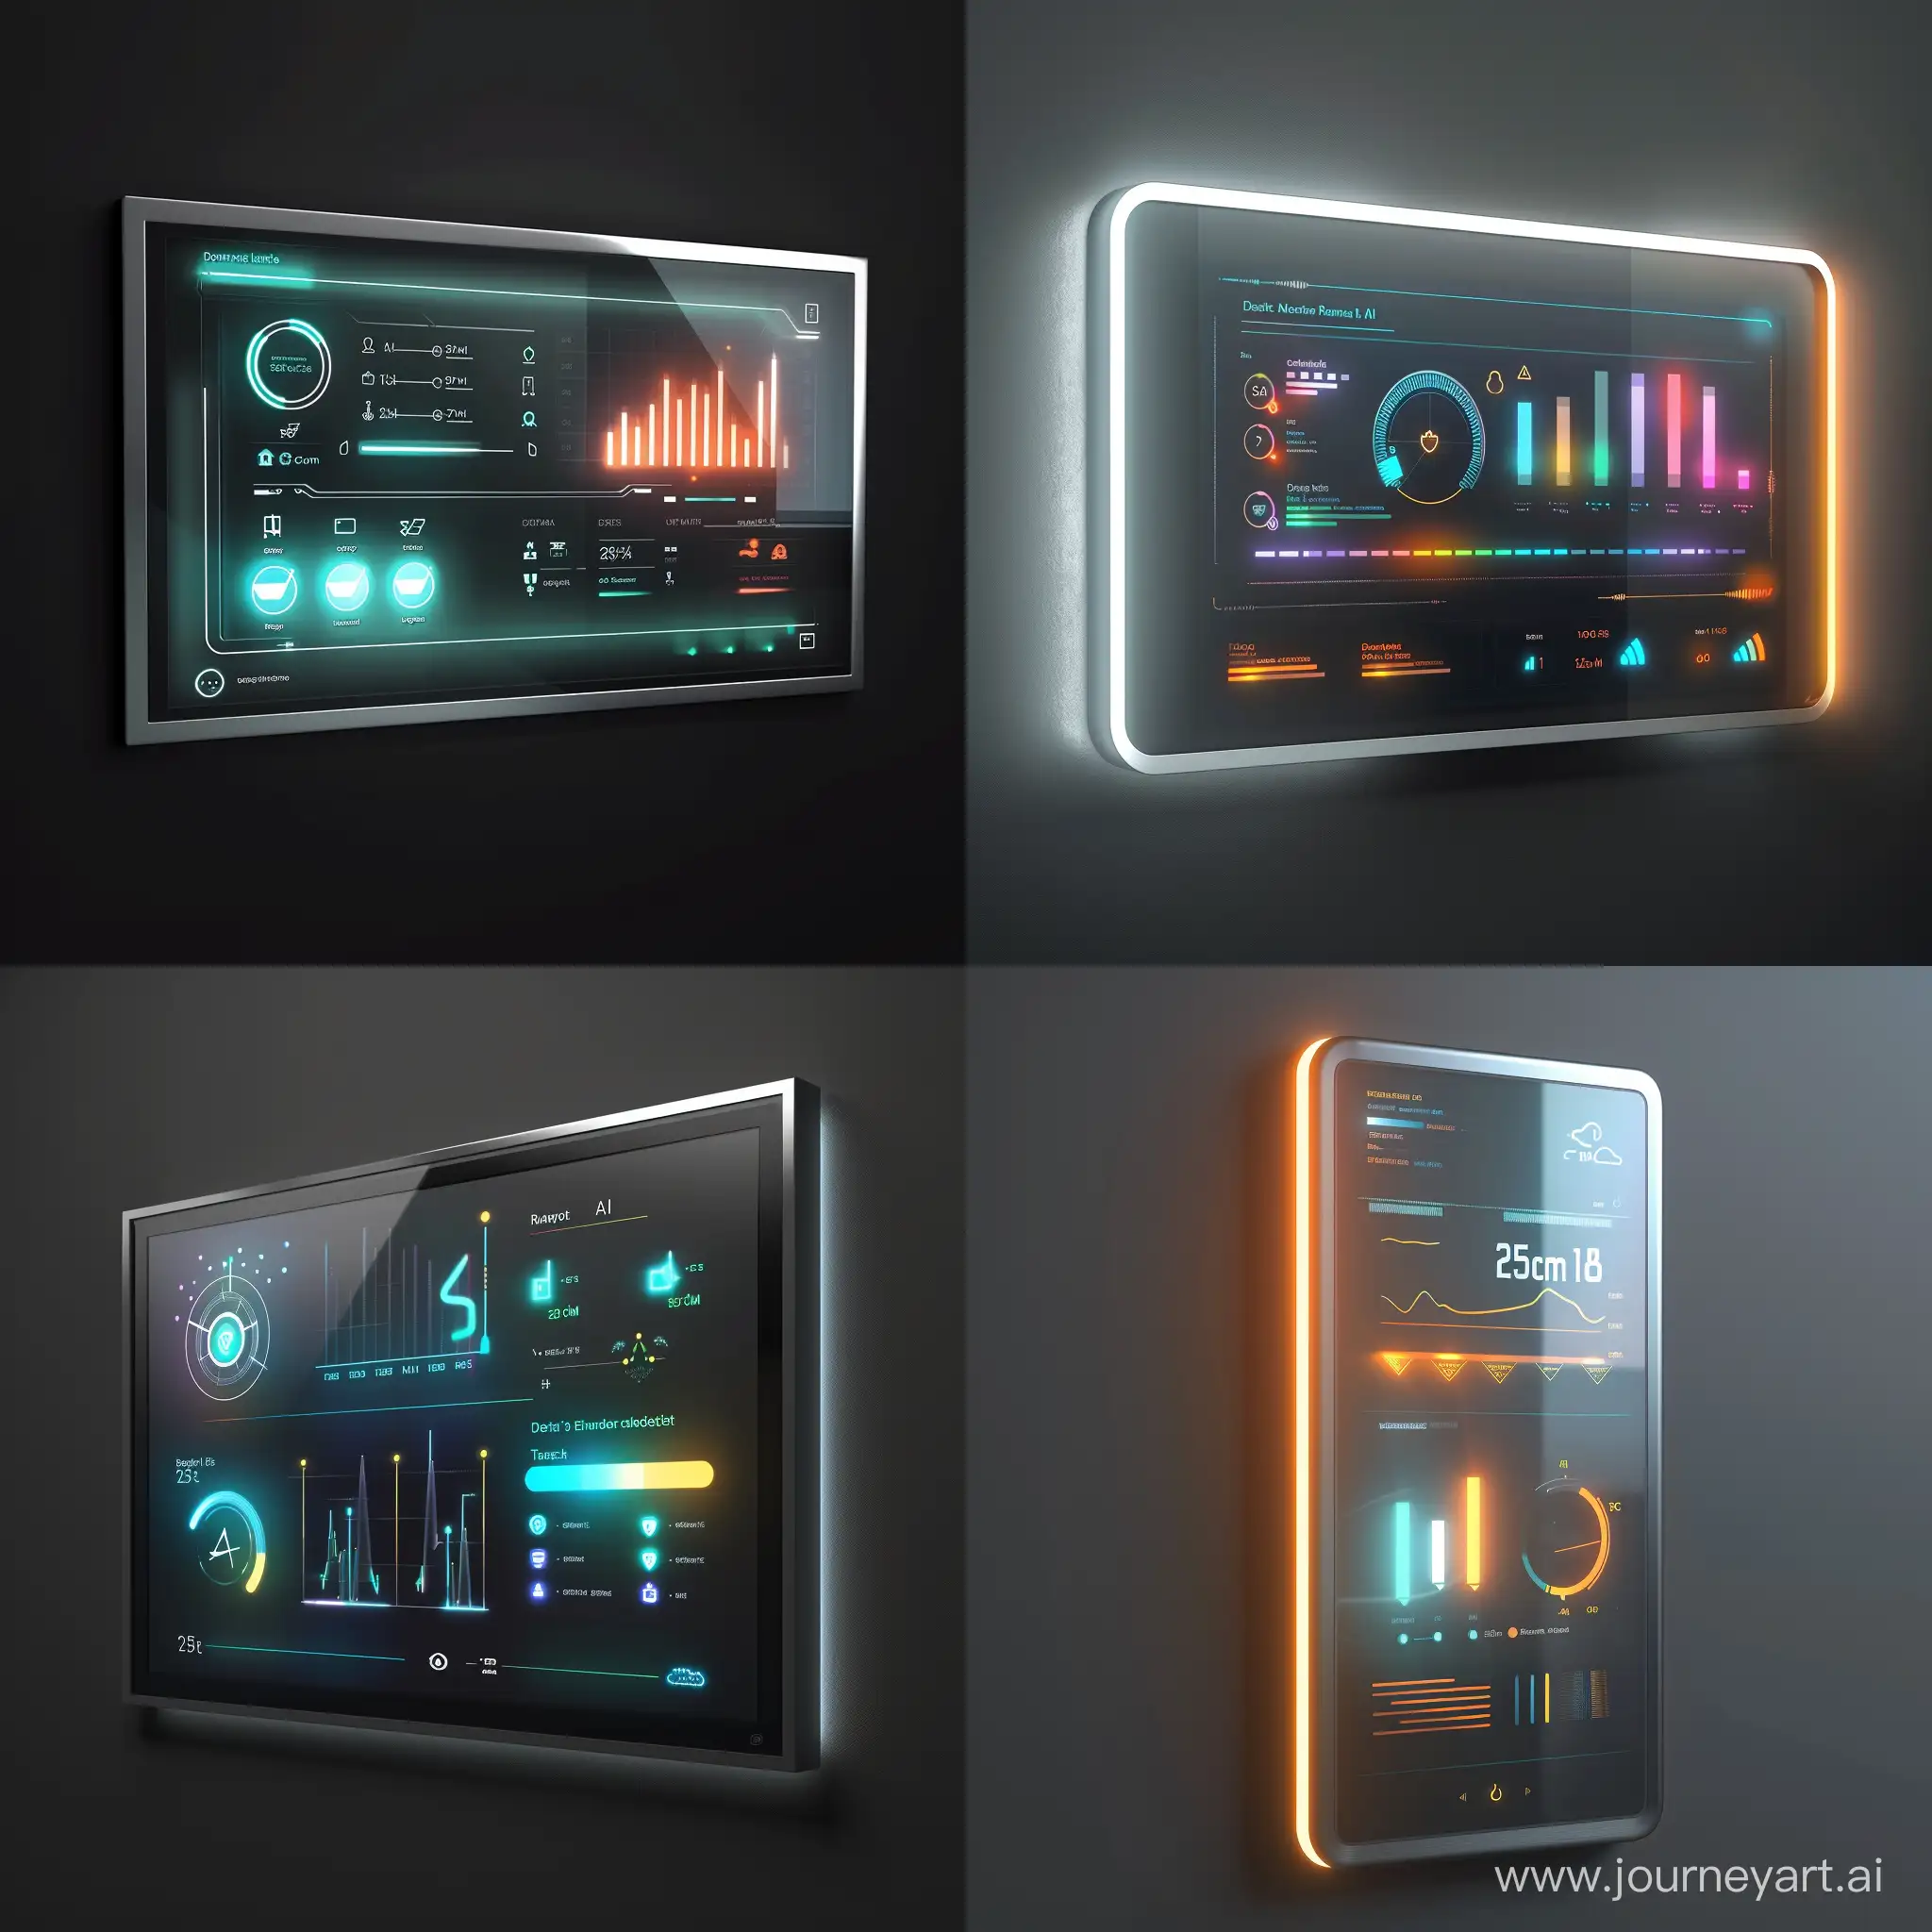 "Imagine  a sleek, rectangular, wall-mounted smart home interface with a smooth, touch-sensitive glass-like surface and a minimalist aluminum frame. The interface should glow with ambient intelligence, displaying vibrant, intuitive graphics for real-time energy consumption. Include ambient backlighting that auto-adjusts to environmental light, with a subtle logo in the lower right corner. Dimensions are 25 cm x 15 cm, thickness 1 cm. Focus on modern elegance and AI-driven efficiency."photorealistic product design style